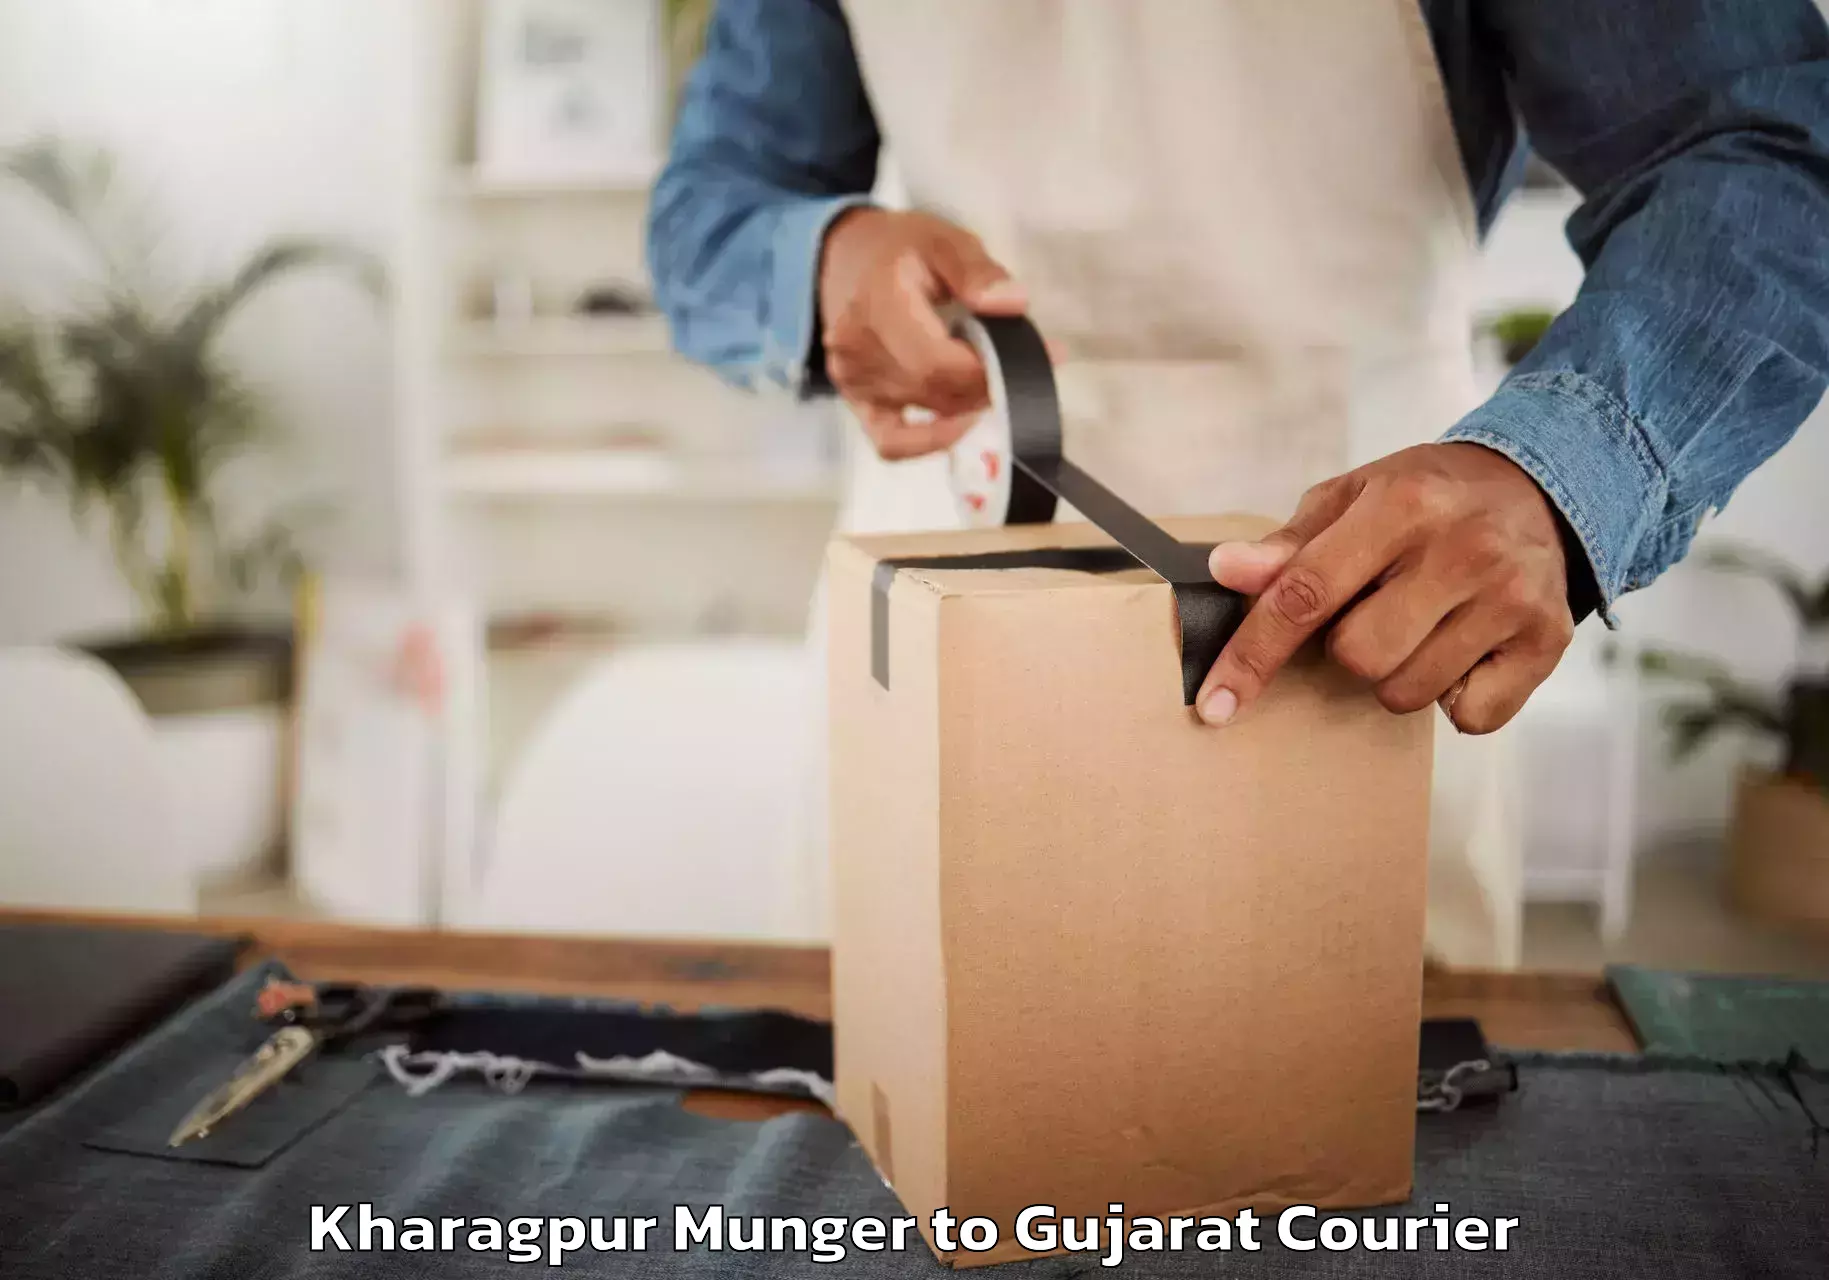 Affordable home movers in Kharagpur Munger to Gujarat